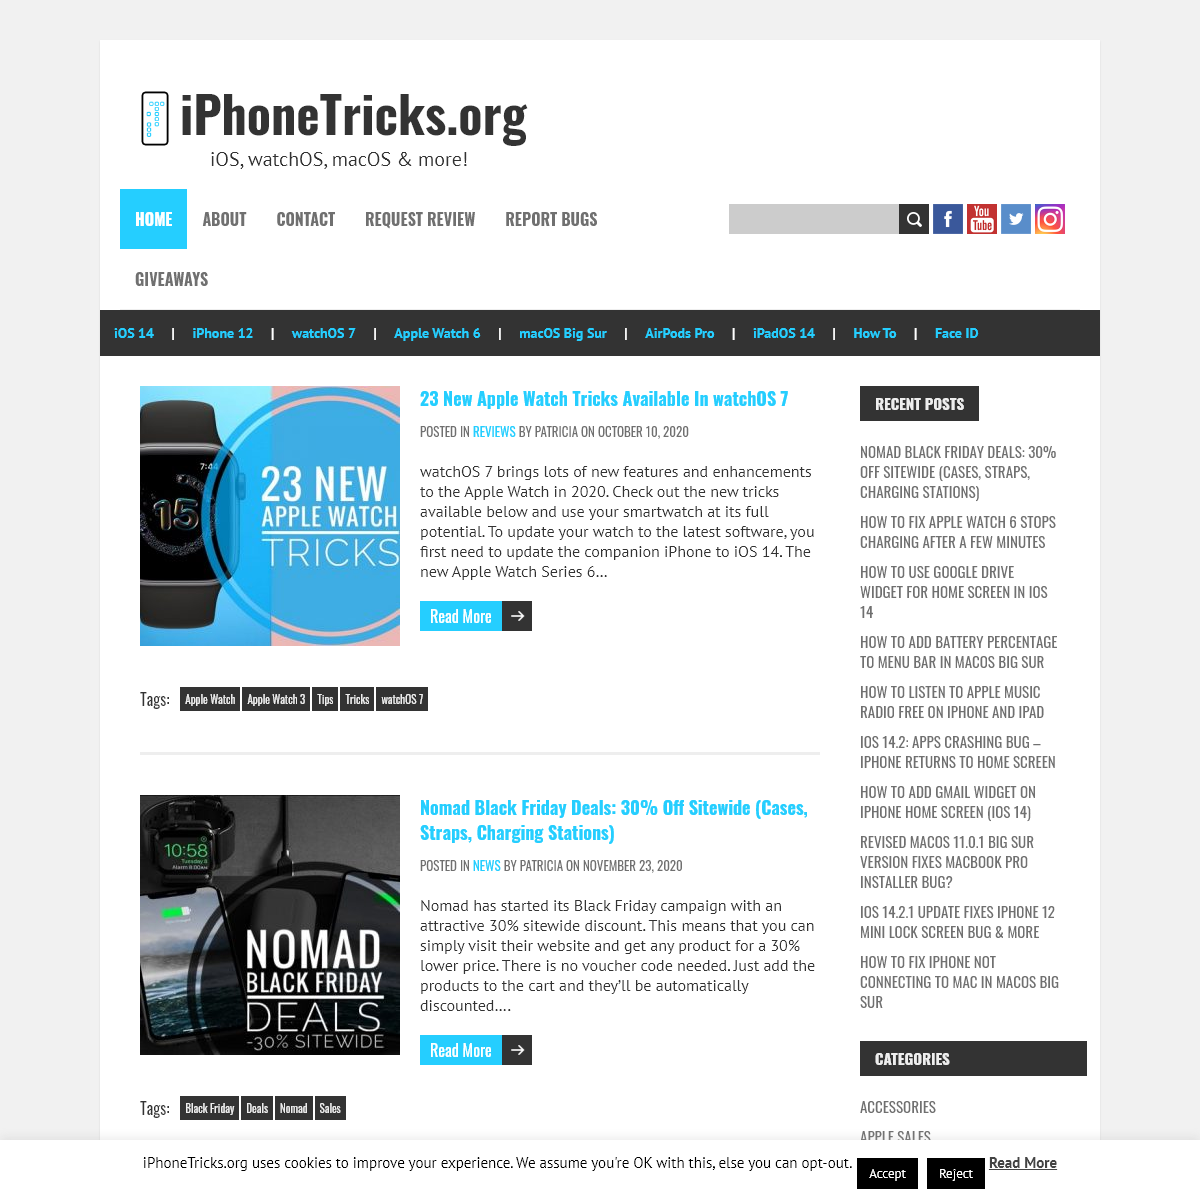 A complete backup of iphonetricks.org